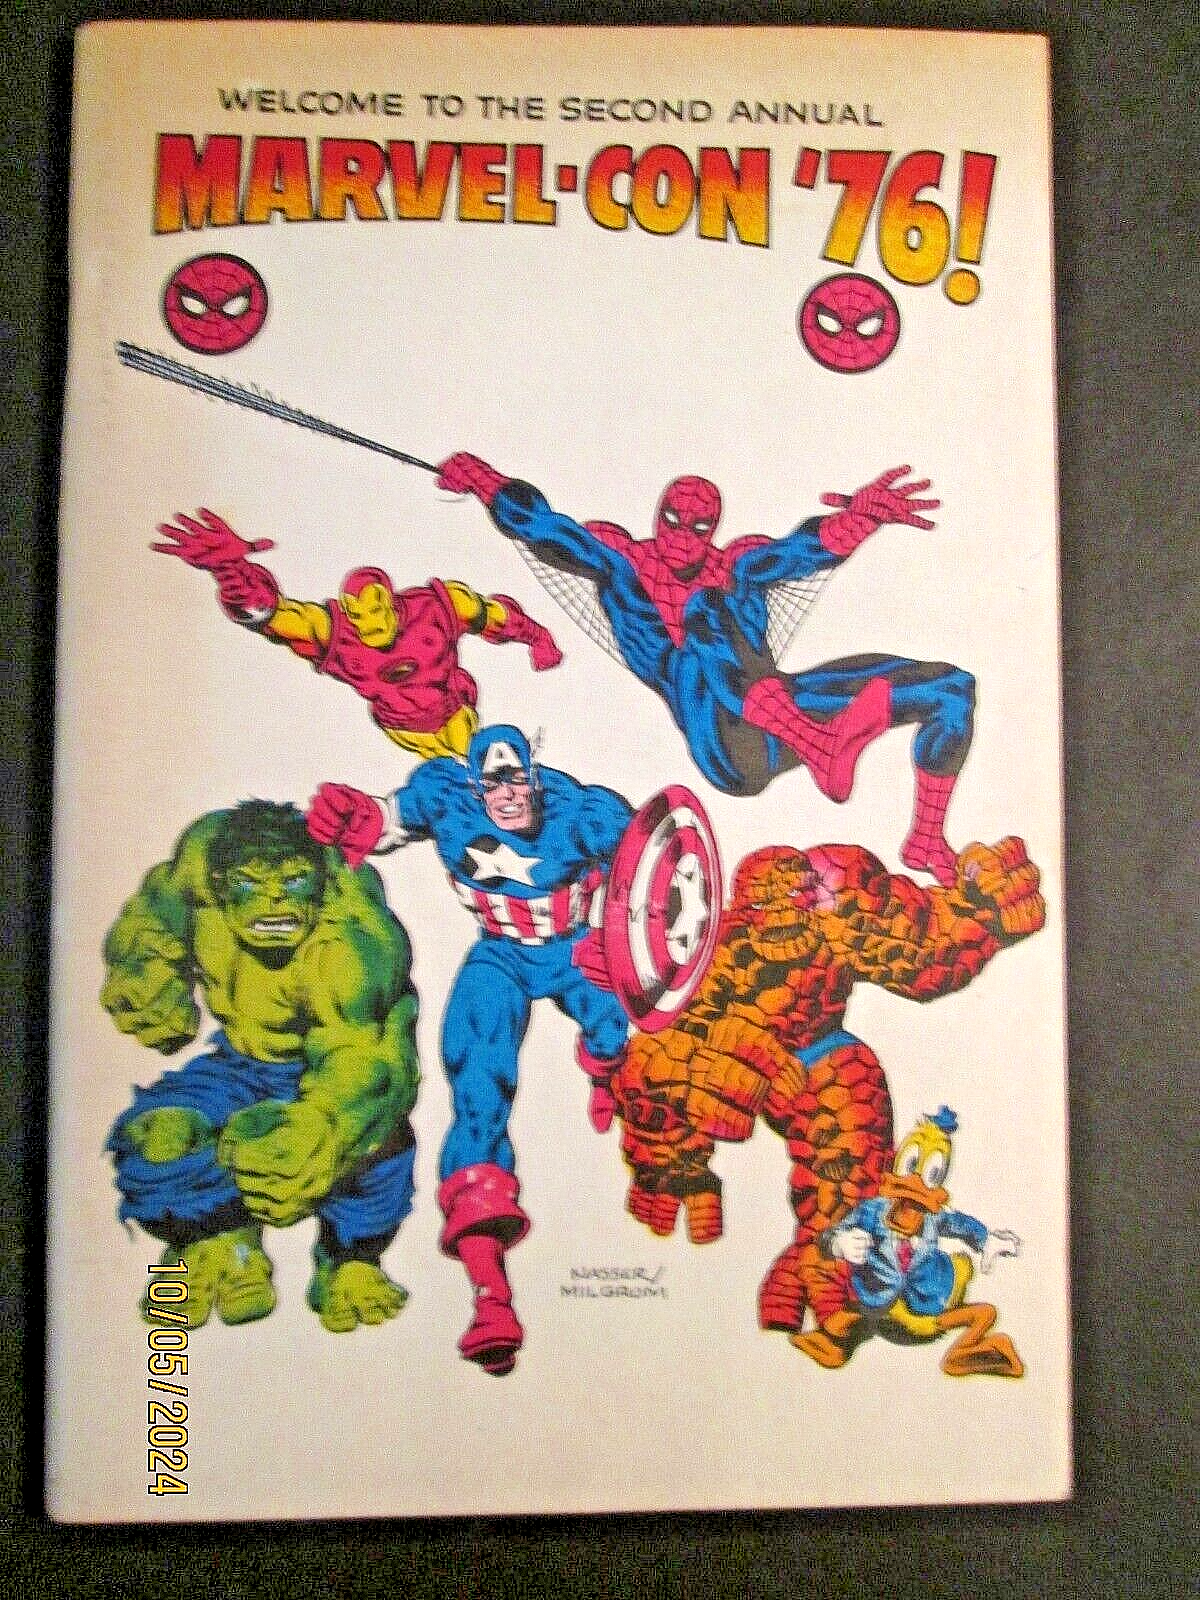 Primary image for JACK KIRBY,ROMITA,BUSCEMA & MORE (MARVEL CON 76) RARE CONVENTION BOOK